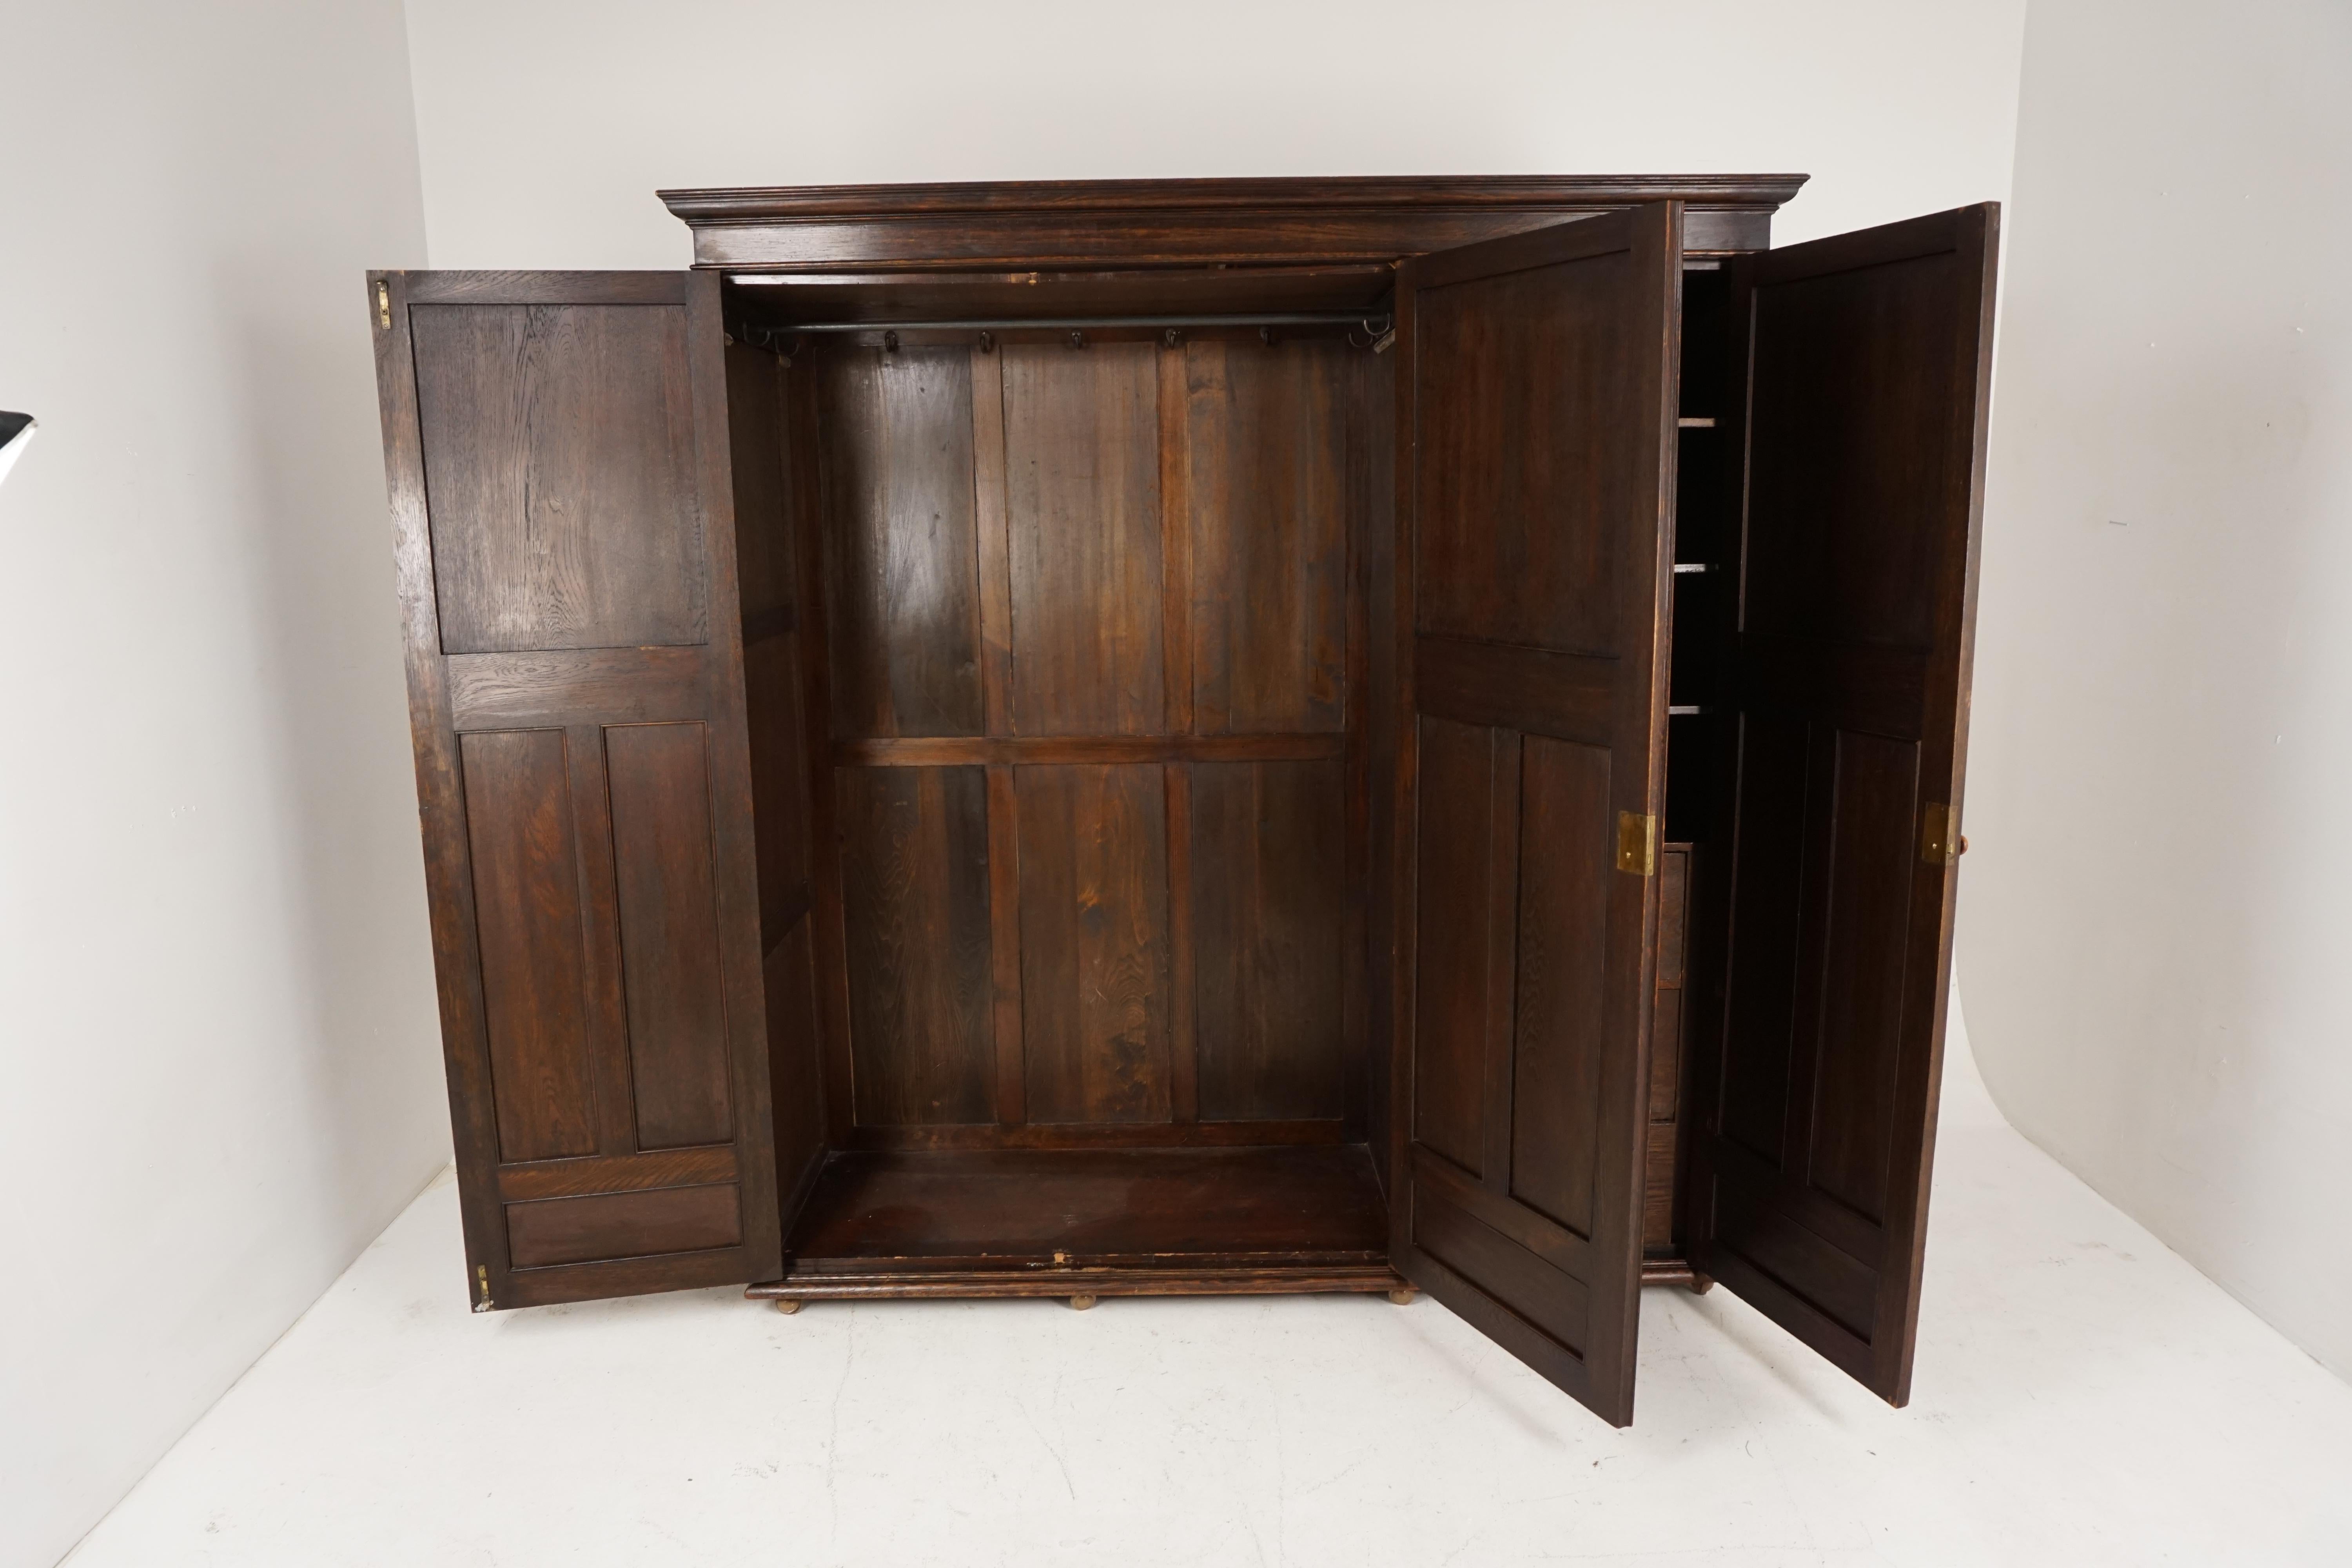 Antique tiger oak compactum armoire, carved wardrobe, closet, Scotland 1910, B2398

Scotland 1910
Solid oak
Original finish
Moulded cornice above
Three geometric carved paneled doors
Opens to reveal large hanging area to one side
The other